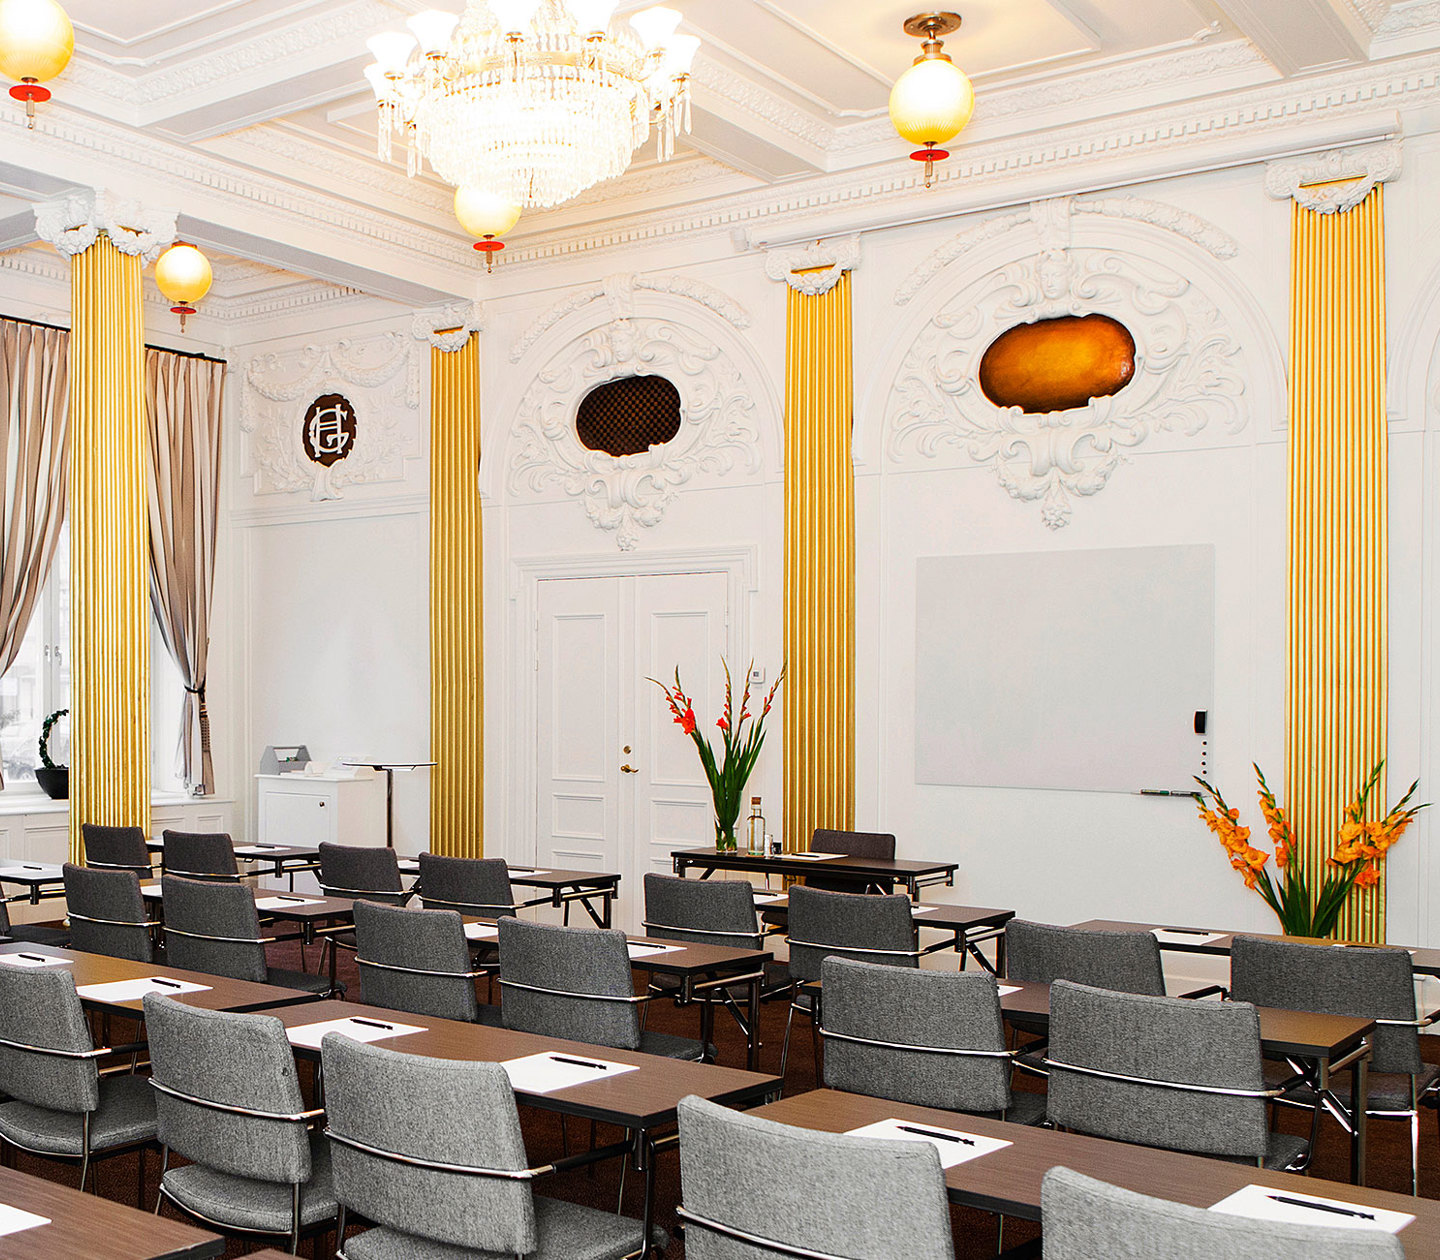 Conference room with stucco and crystal chandelier